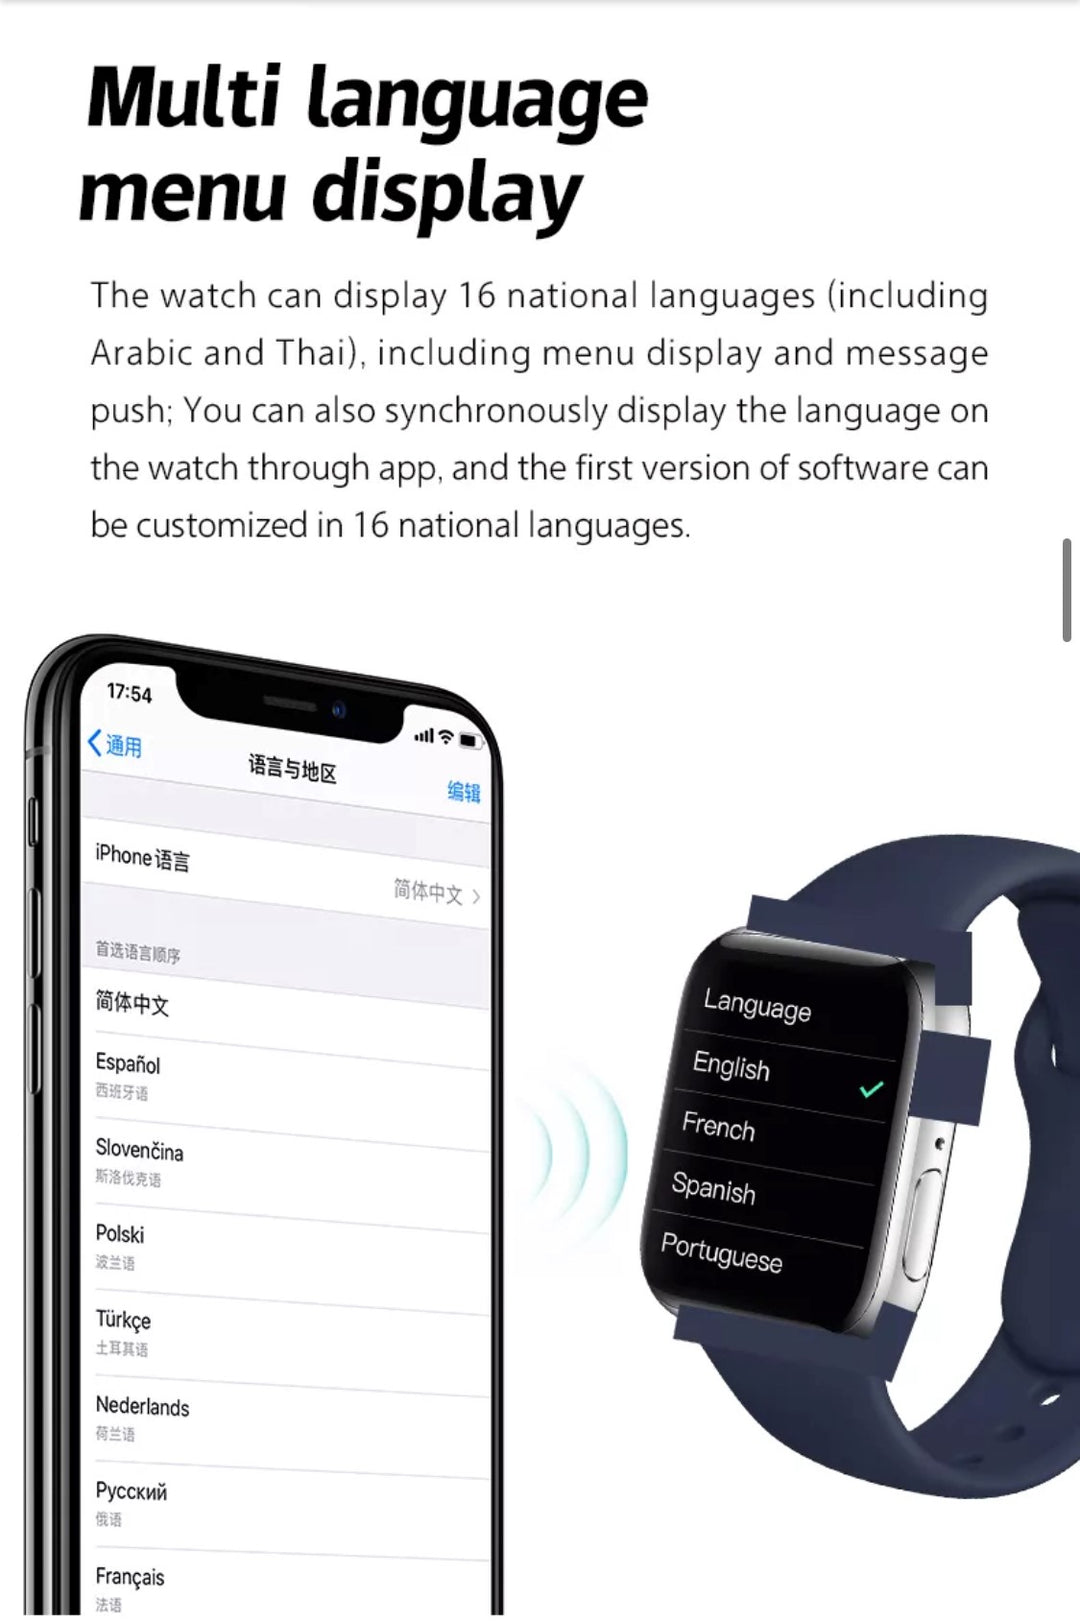 i7 Pro Max Black Extra Straps Availible Smart Watch South Africa